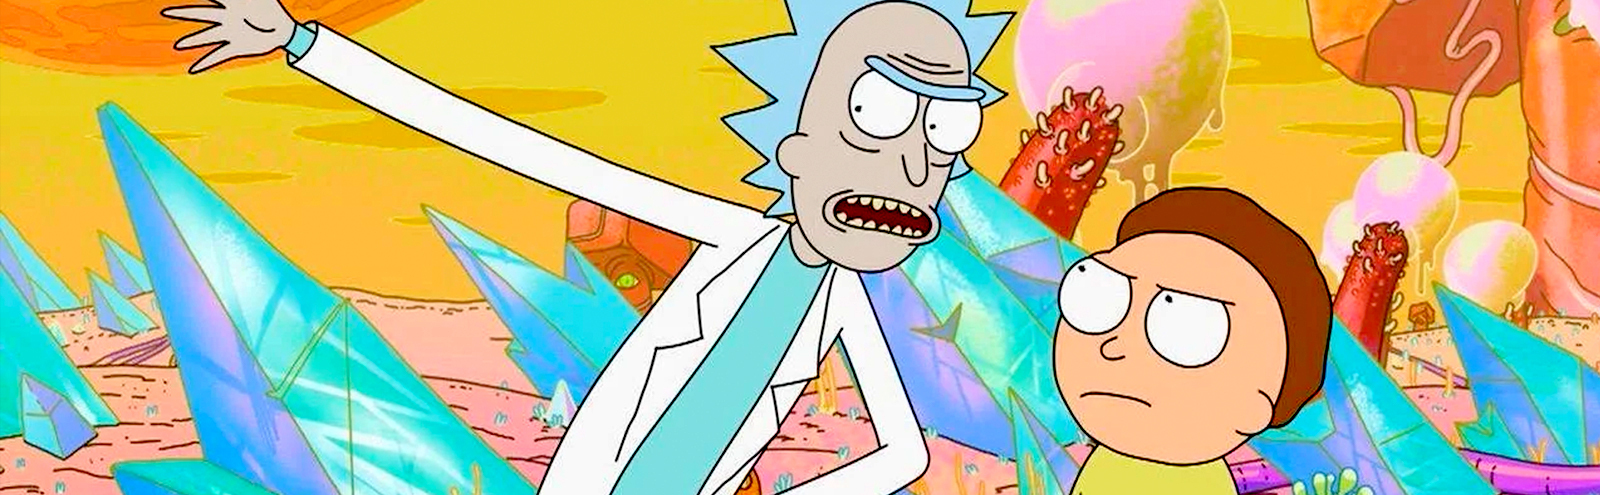 kanal dannelse knude The 10 Best 'Rick And Morty' Episodes, Ranked